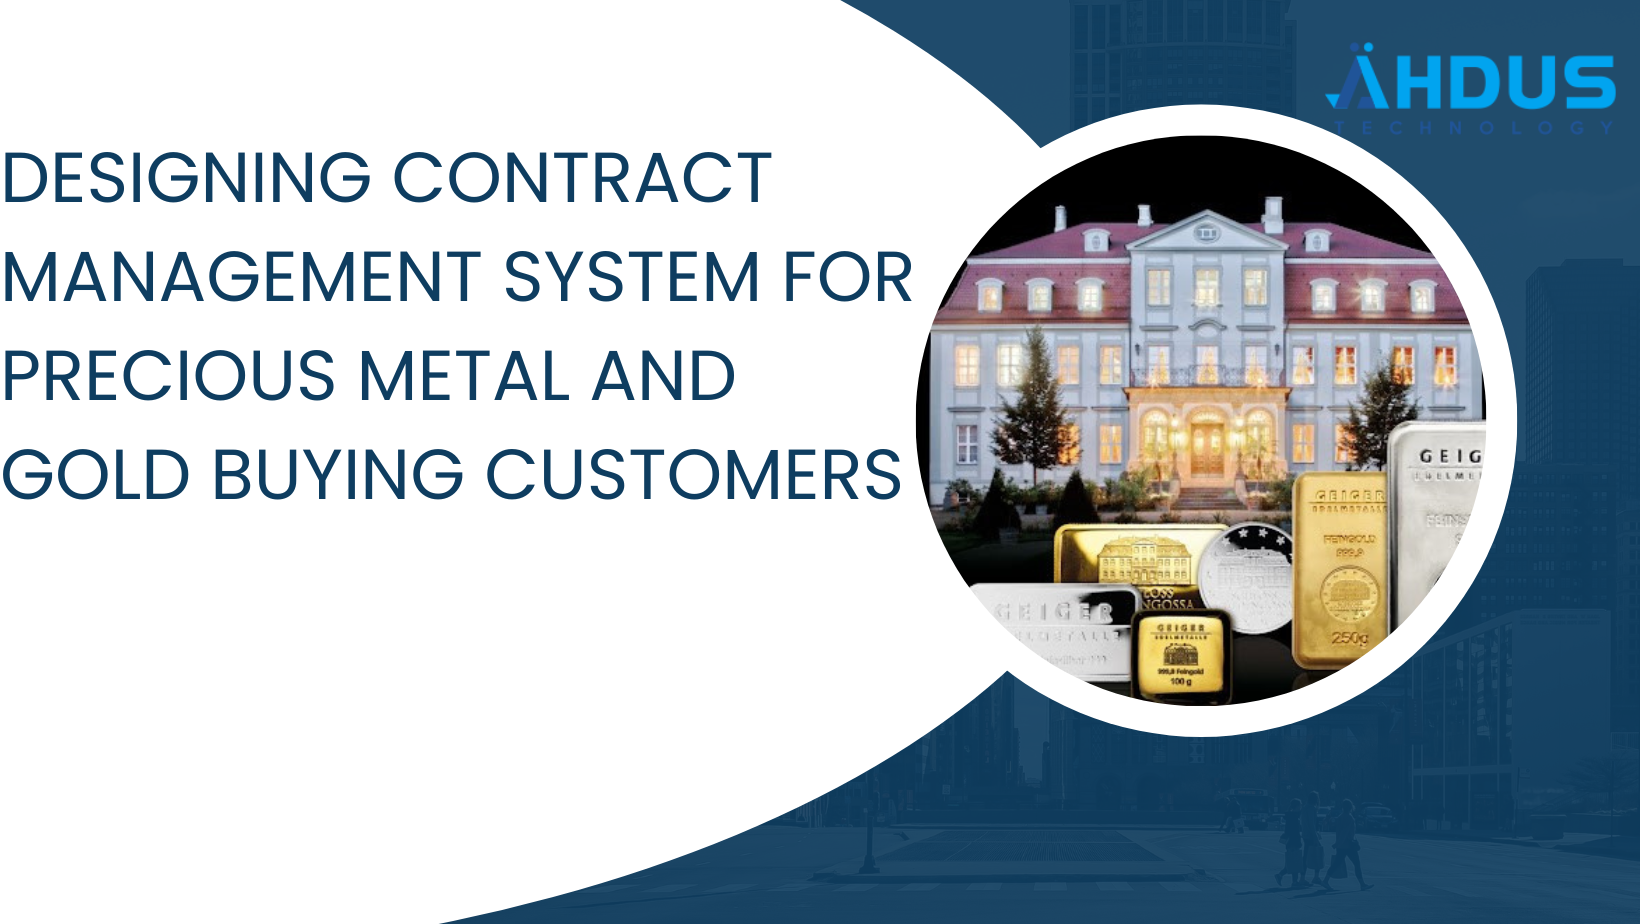 DESIGNING CONTRACT MANAGEMENT SYSTEM FOR PRECIOUS METAL AND GOLD BUYING CUSTOMERS